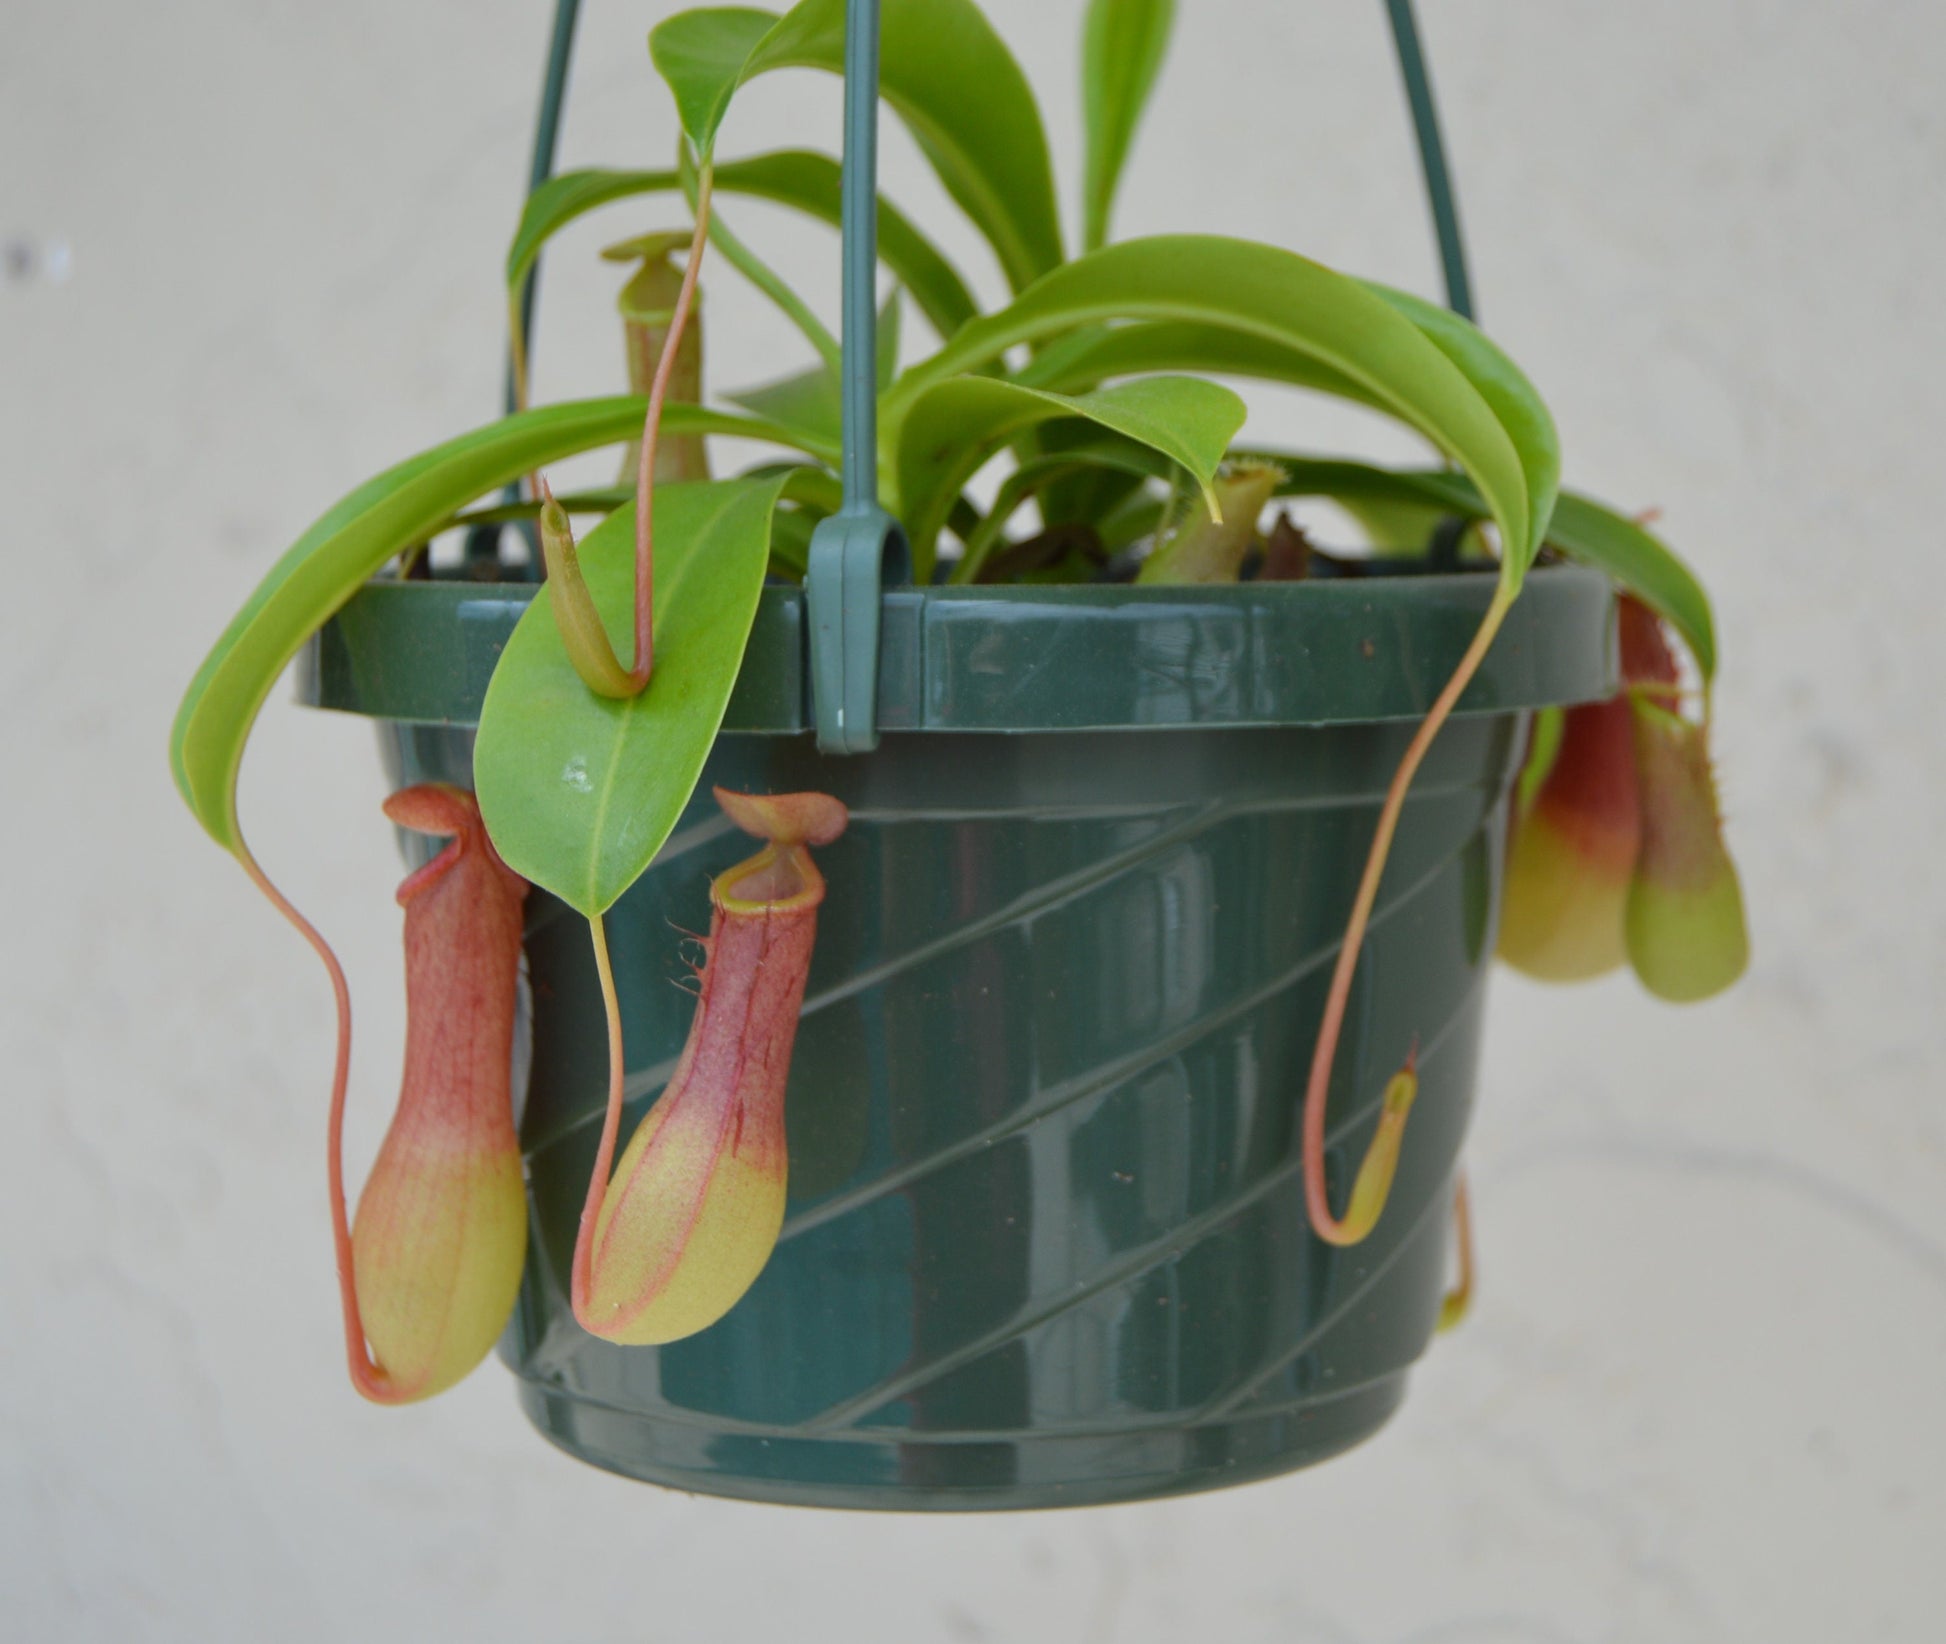 nepenthes alata carnivorous pitcher plant 6 inch hanging basket easy to grow with multiple red and green pitchers with long slender leaves